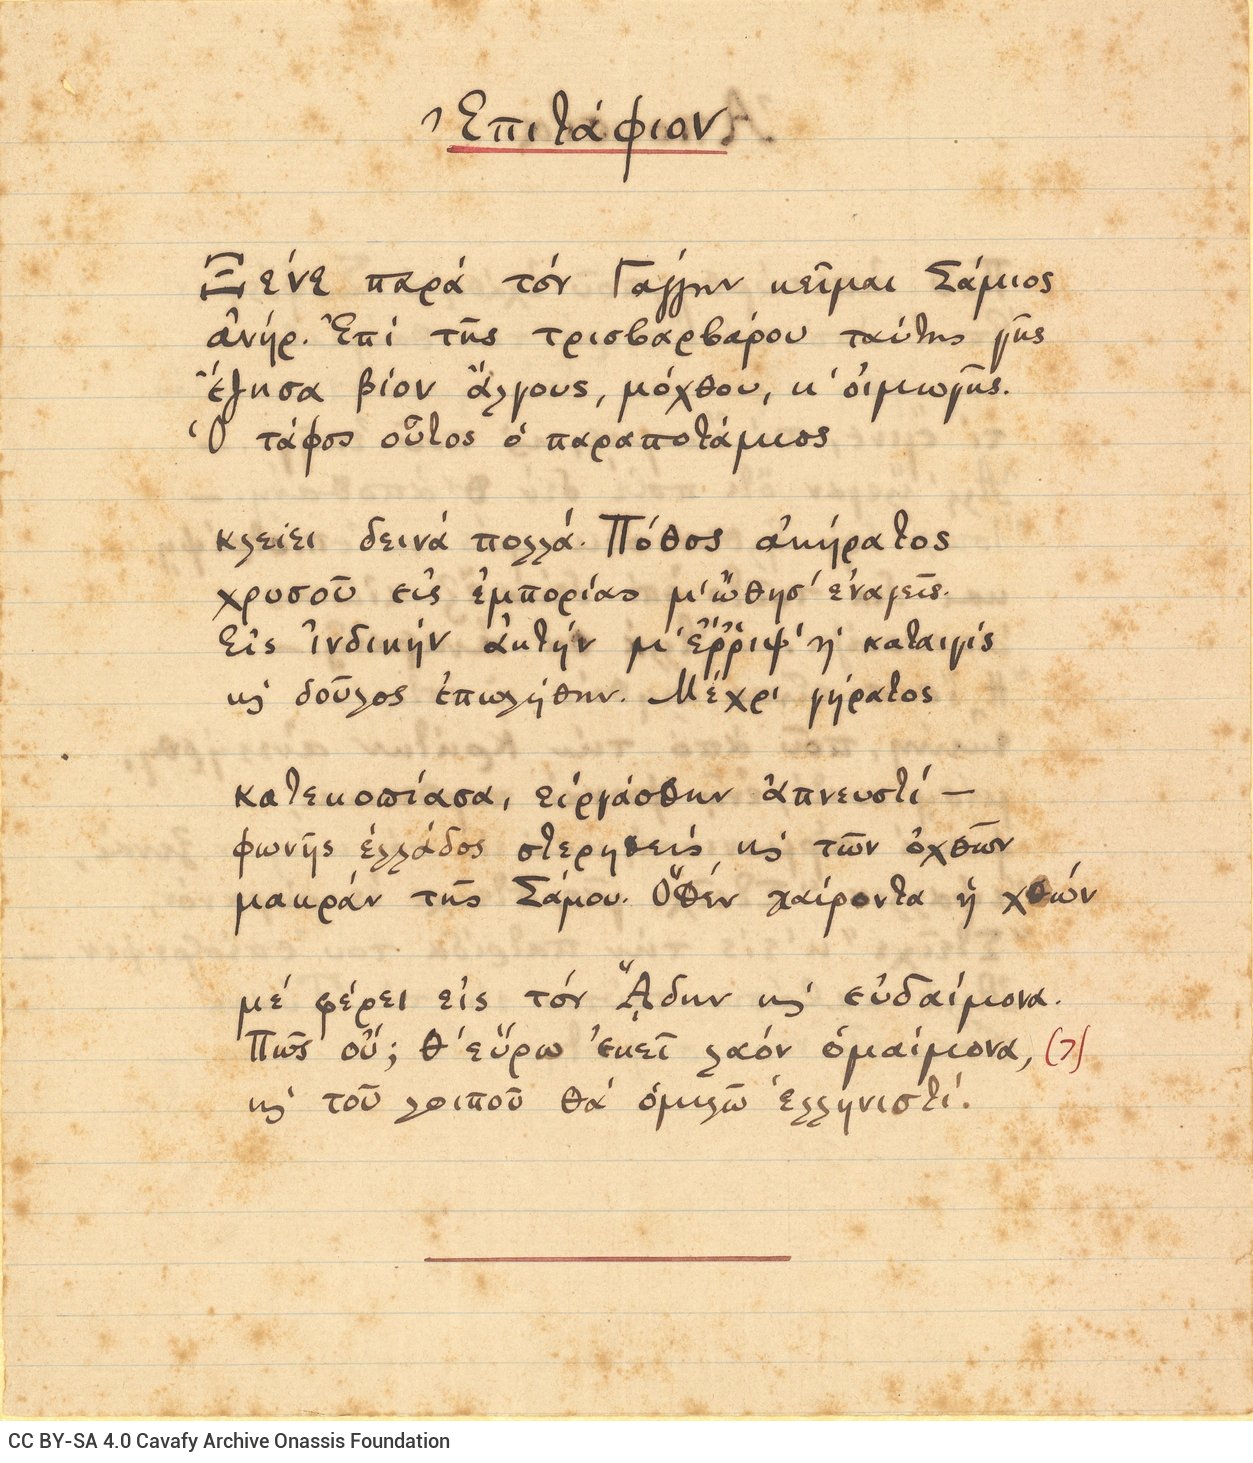 Manuscript of the poems "Epitaph" and "Absence" on both sides of a sheet. There are numbers next to certain verses; the ti